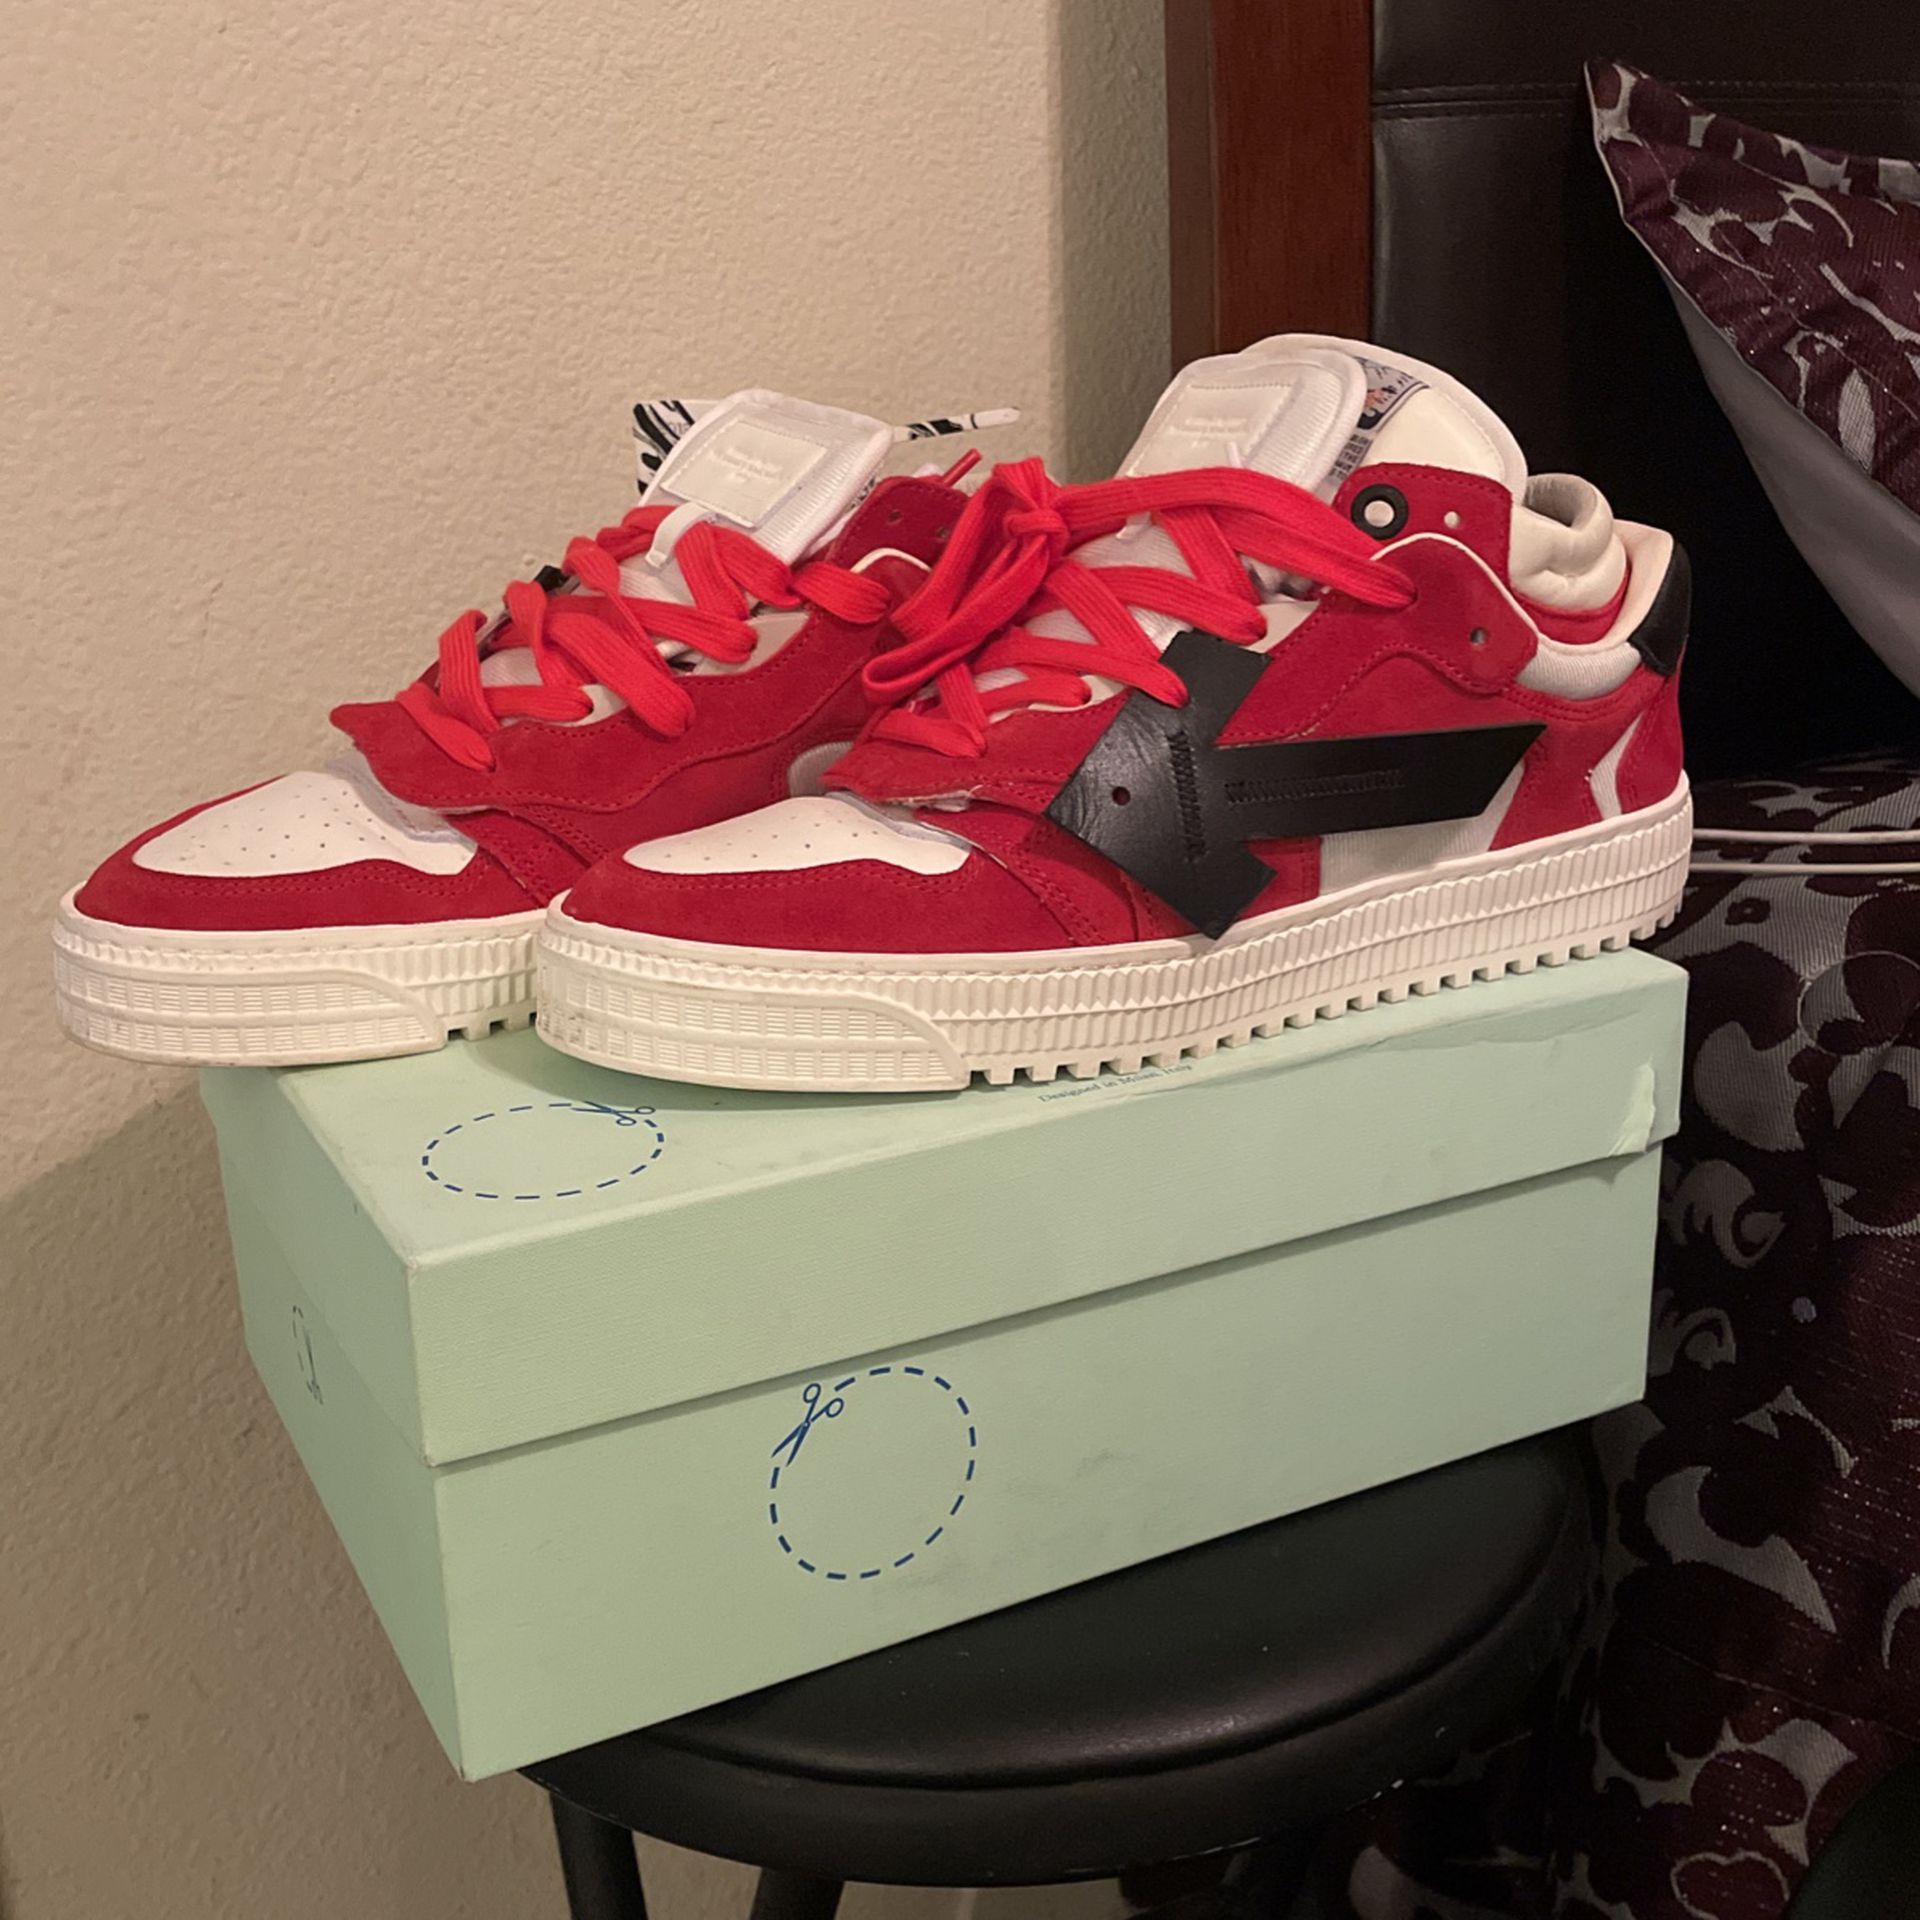 Red Bottom Men Shoes for Sale in San Antonio, TX - OfferUp